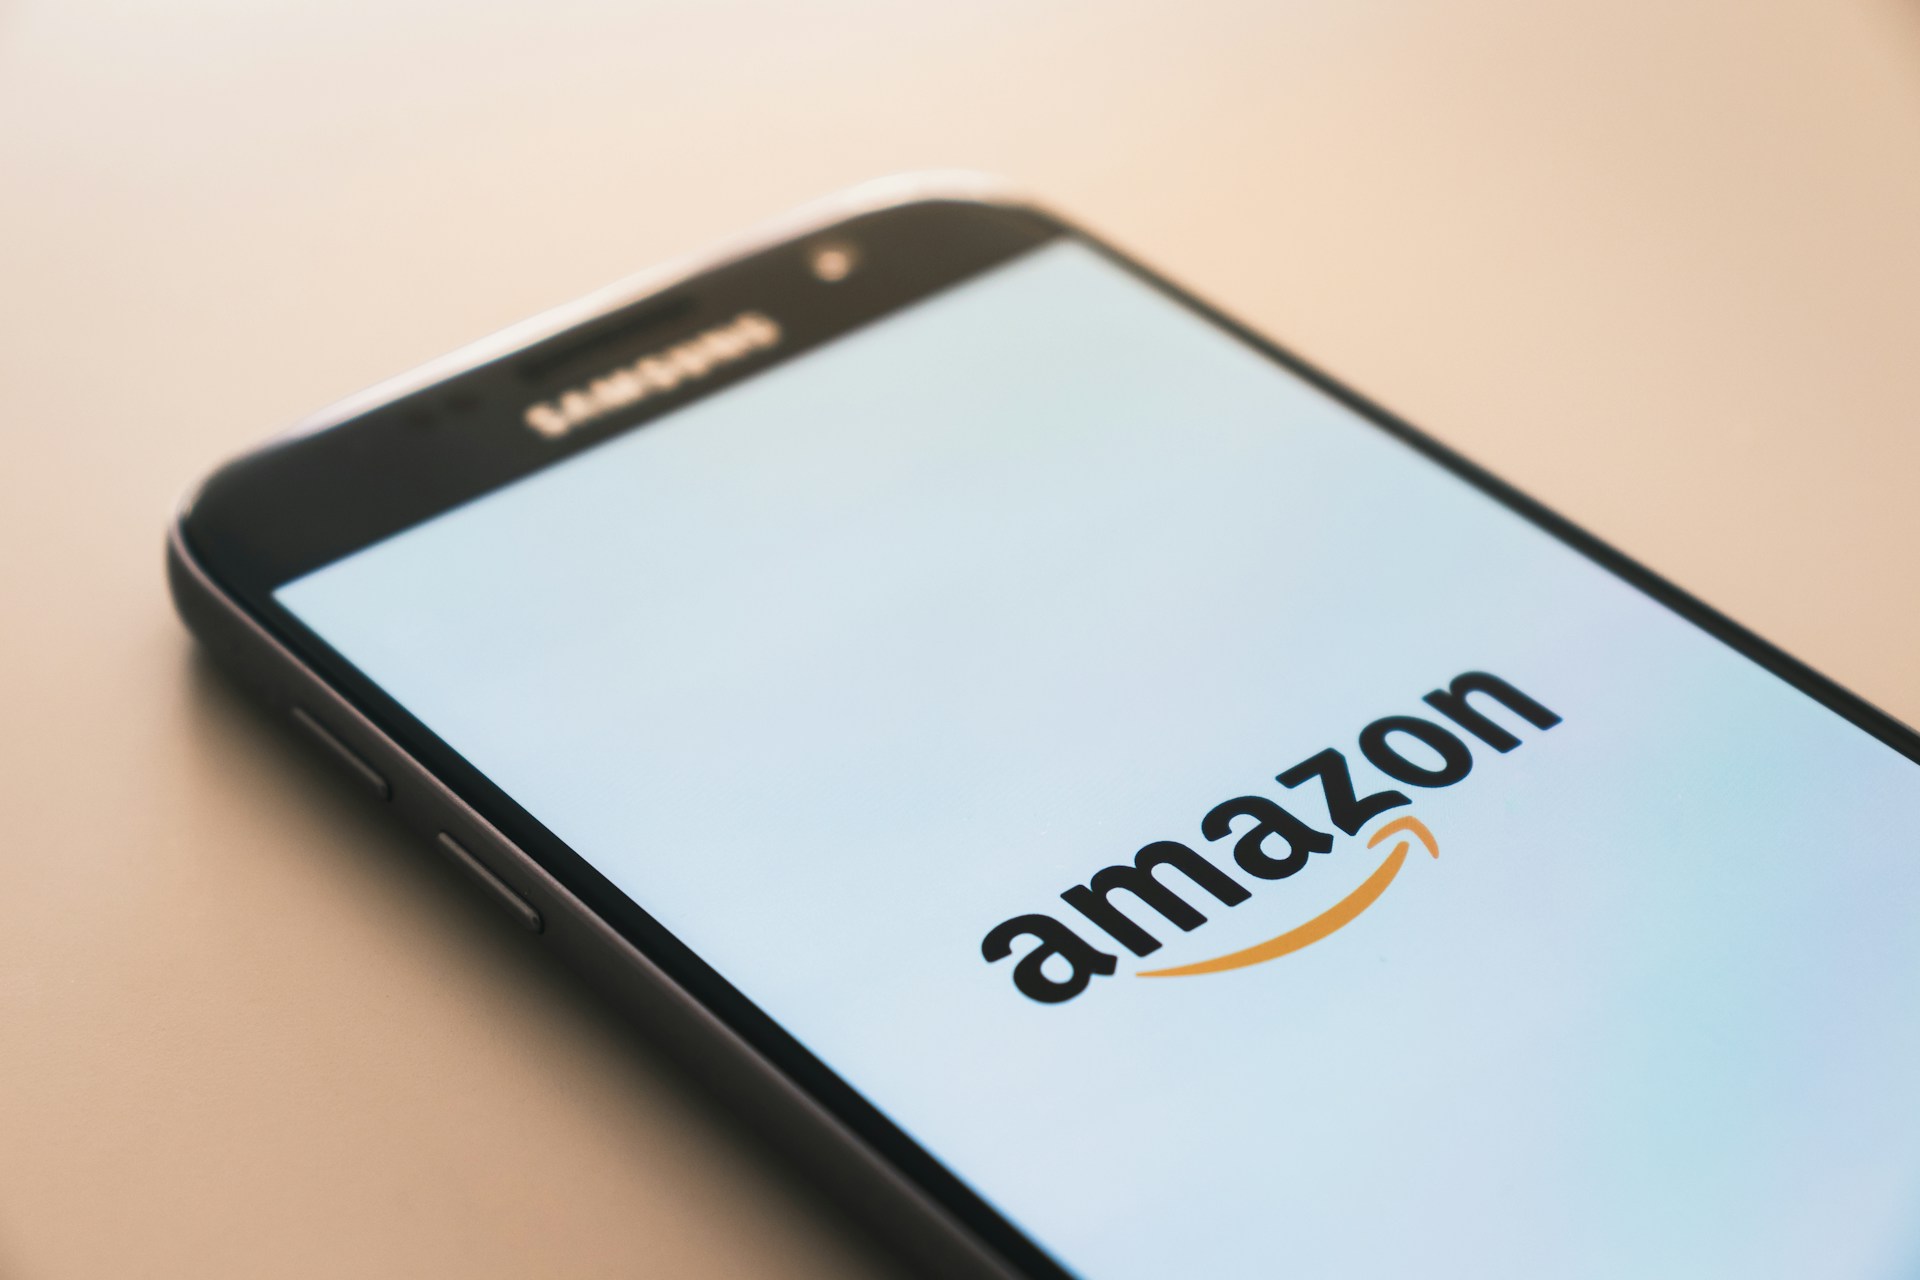 Amazon expands availability of Q, an enterprise chatbot with artificial intelligence